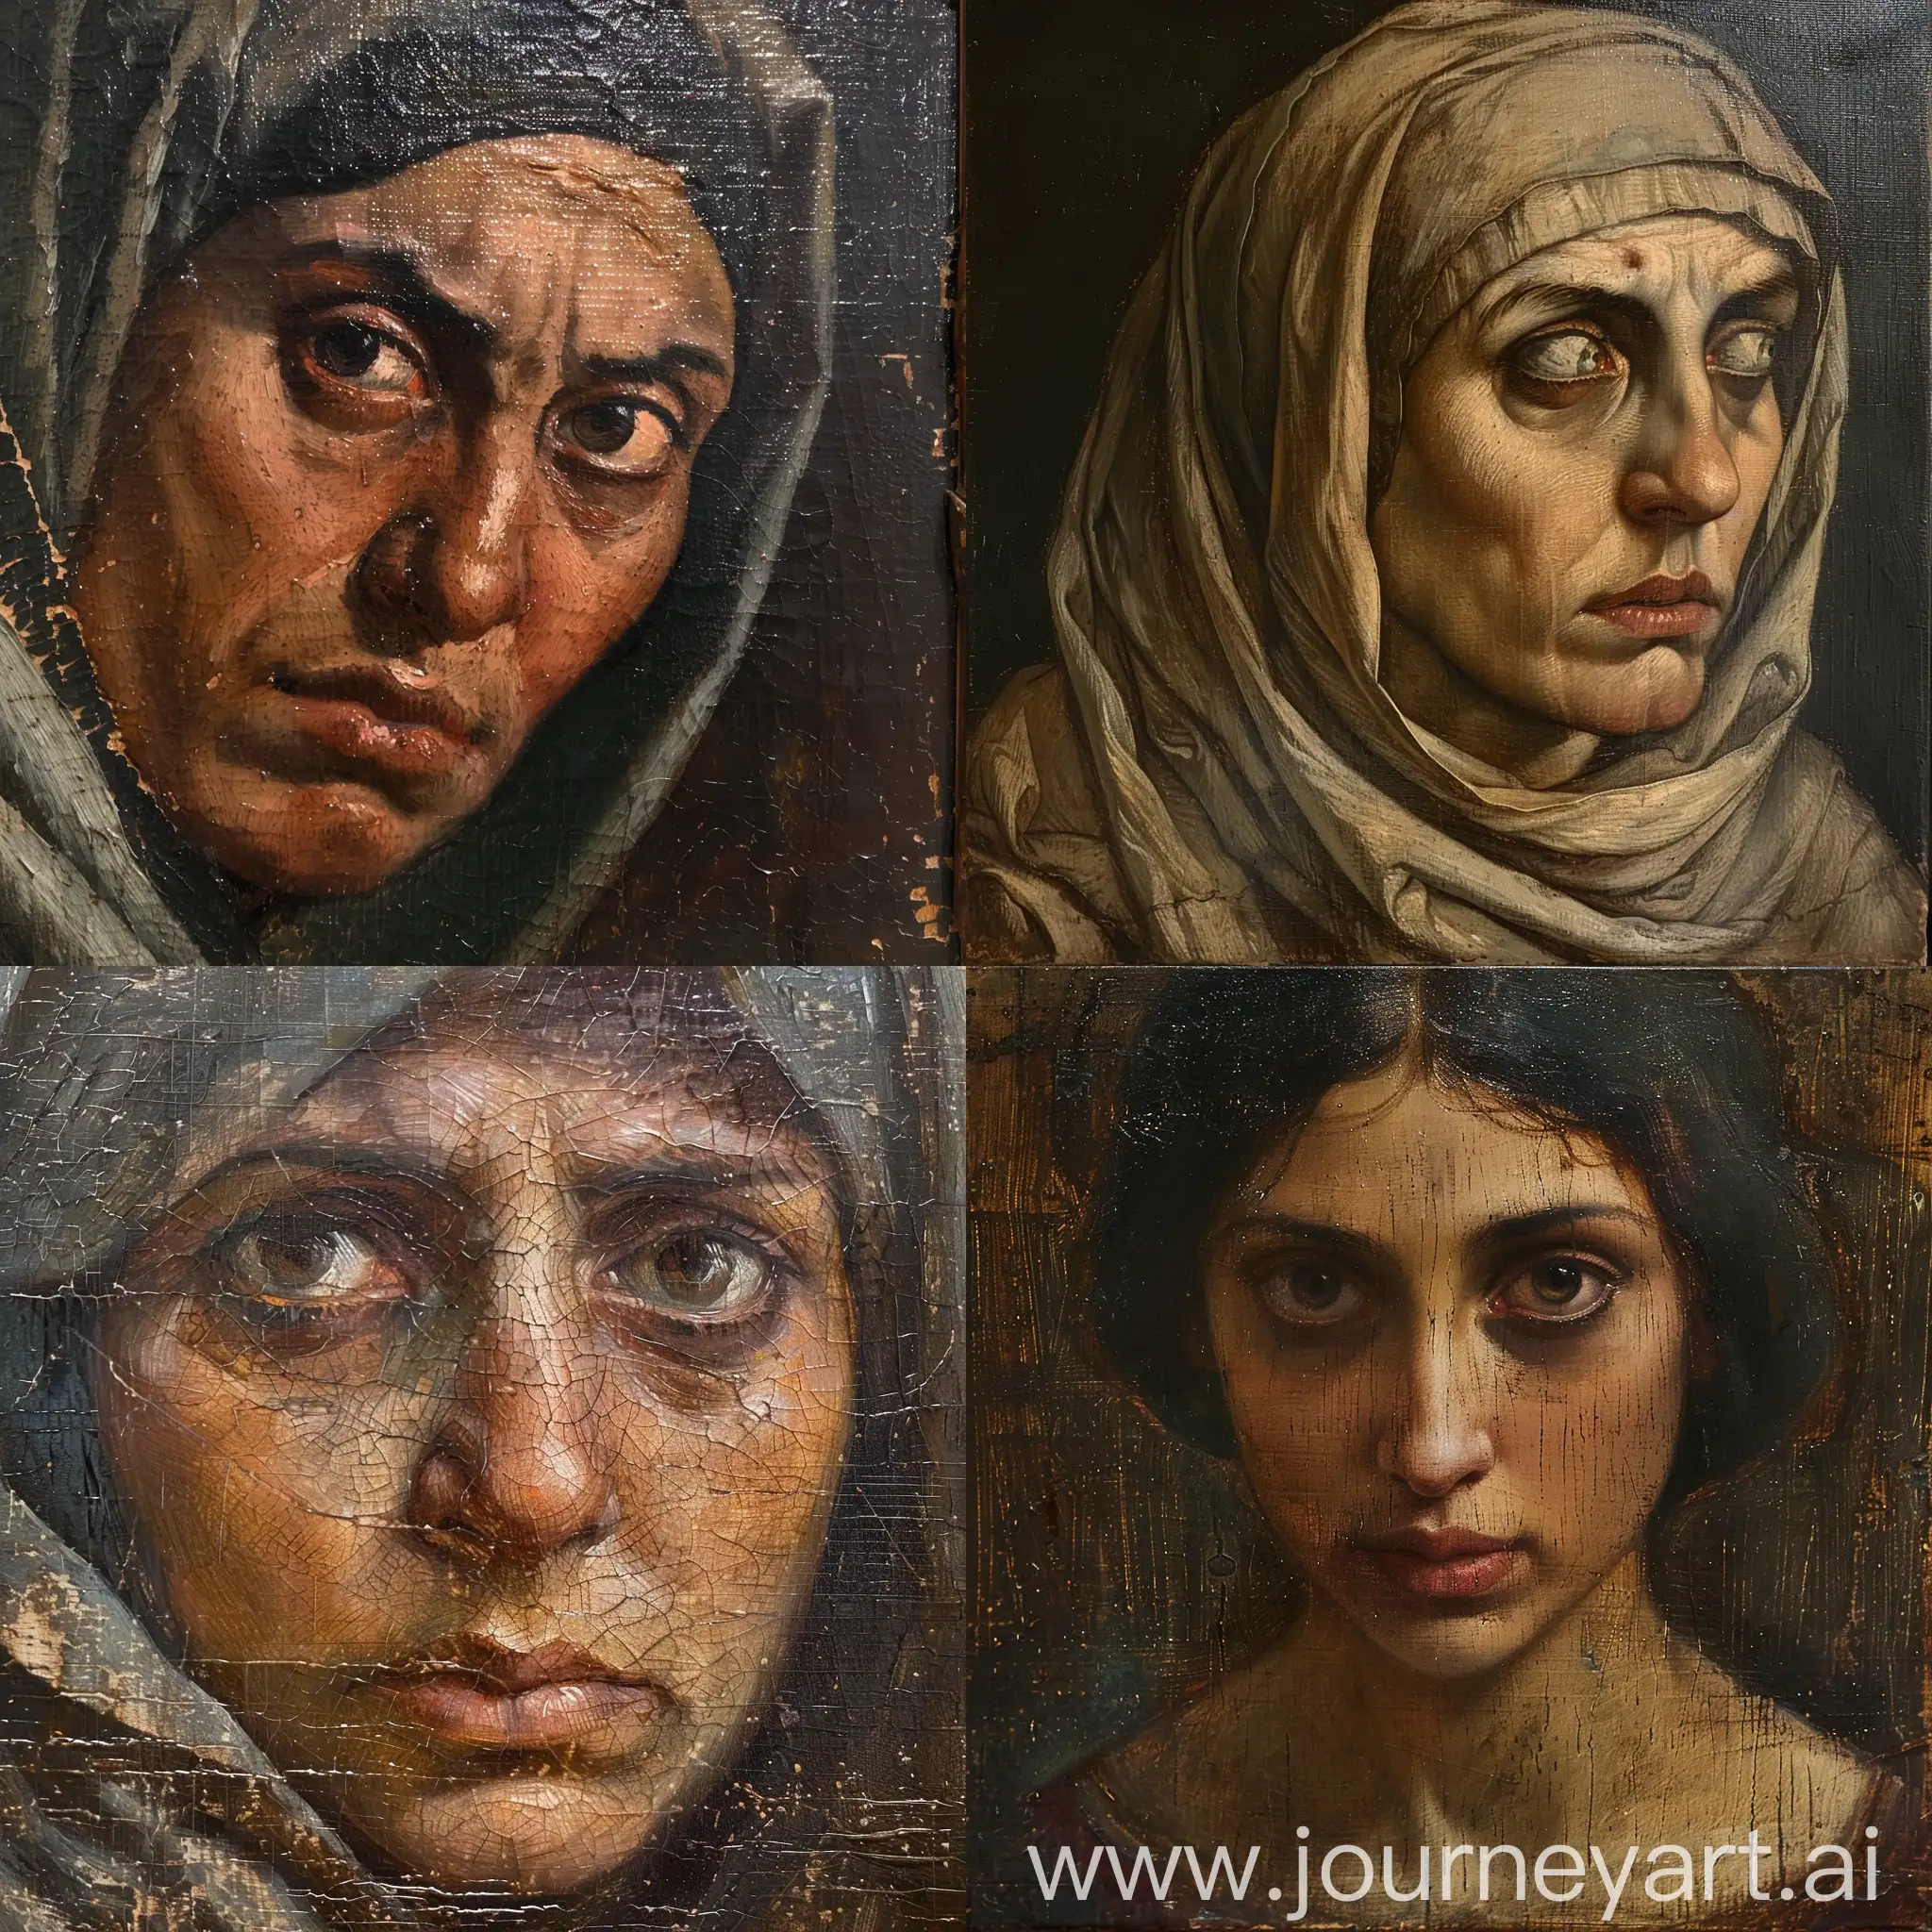 An Anatolian Greek woman. She looks very shady and her eyes have an evil sense to them. She also has a crooked nose. Ottoman period. Islamic Renaissance style, Leonardo Davinci style, very detailed, oil painting.